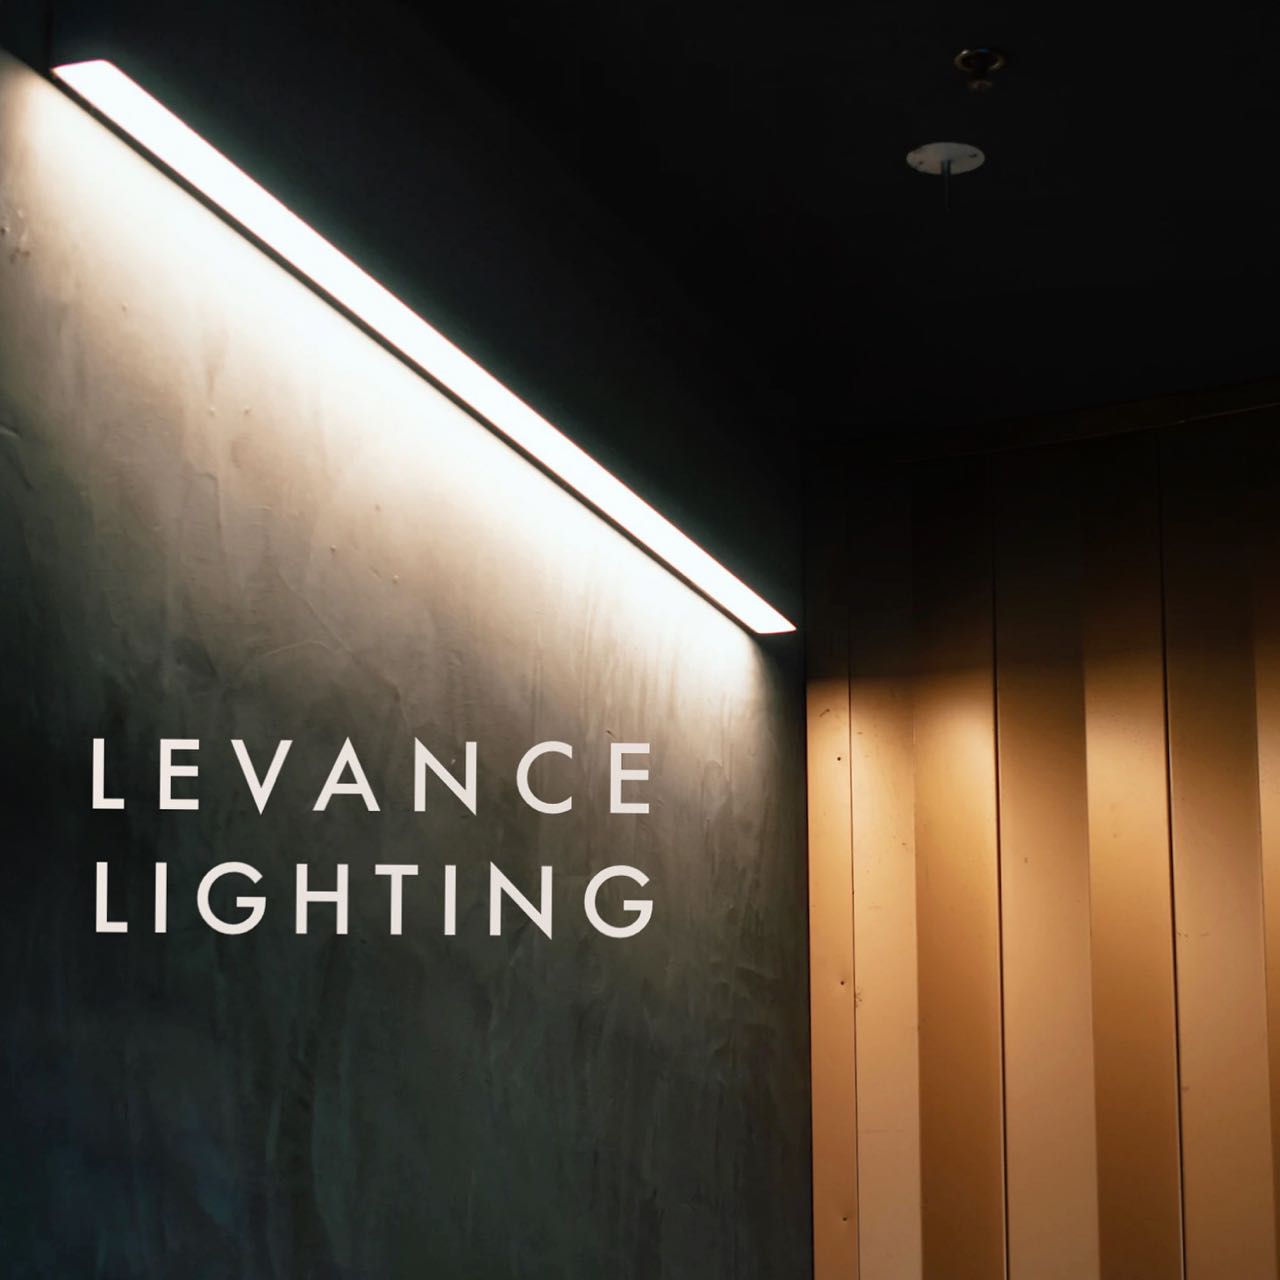 Light Up Your World with Levance Lighting!